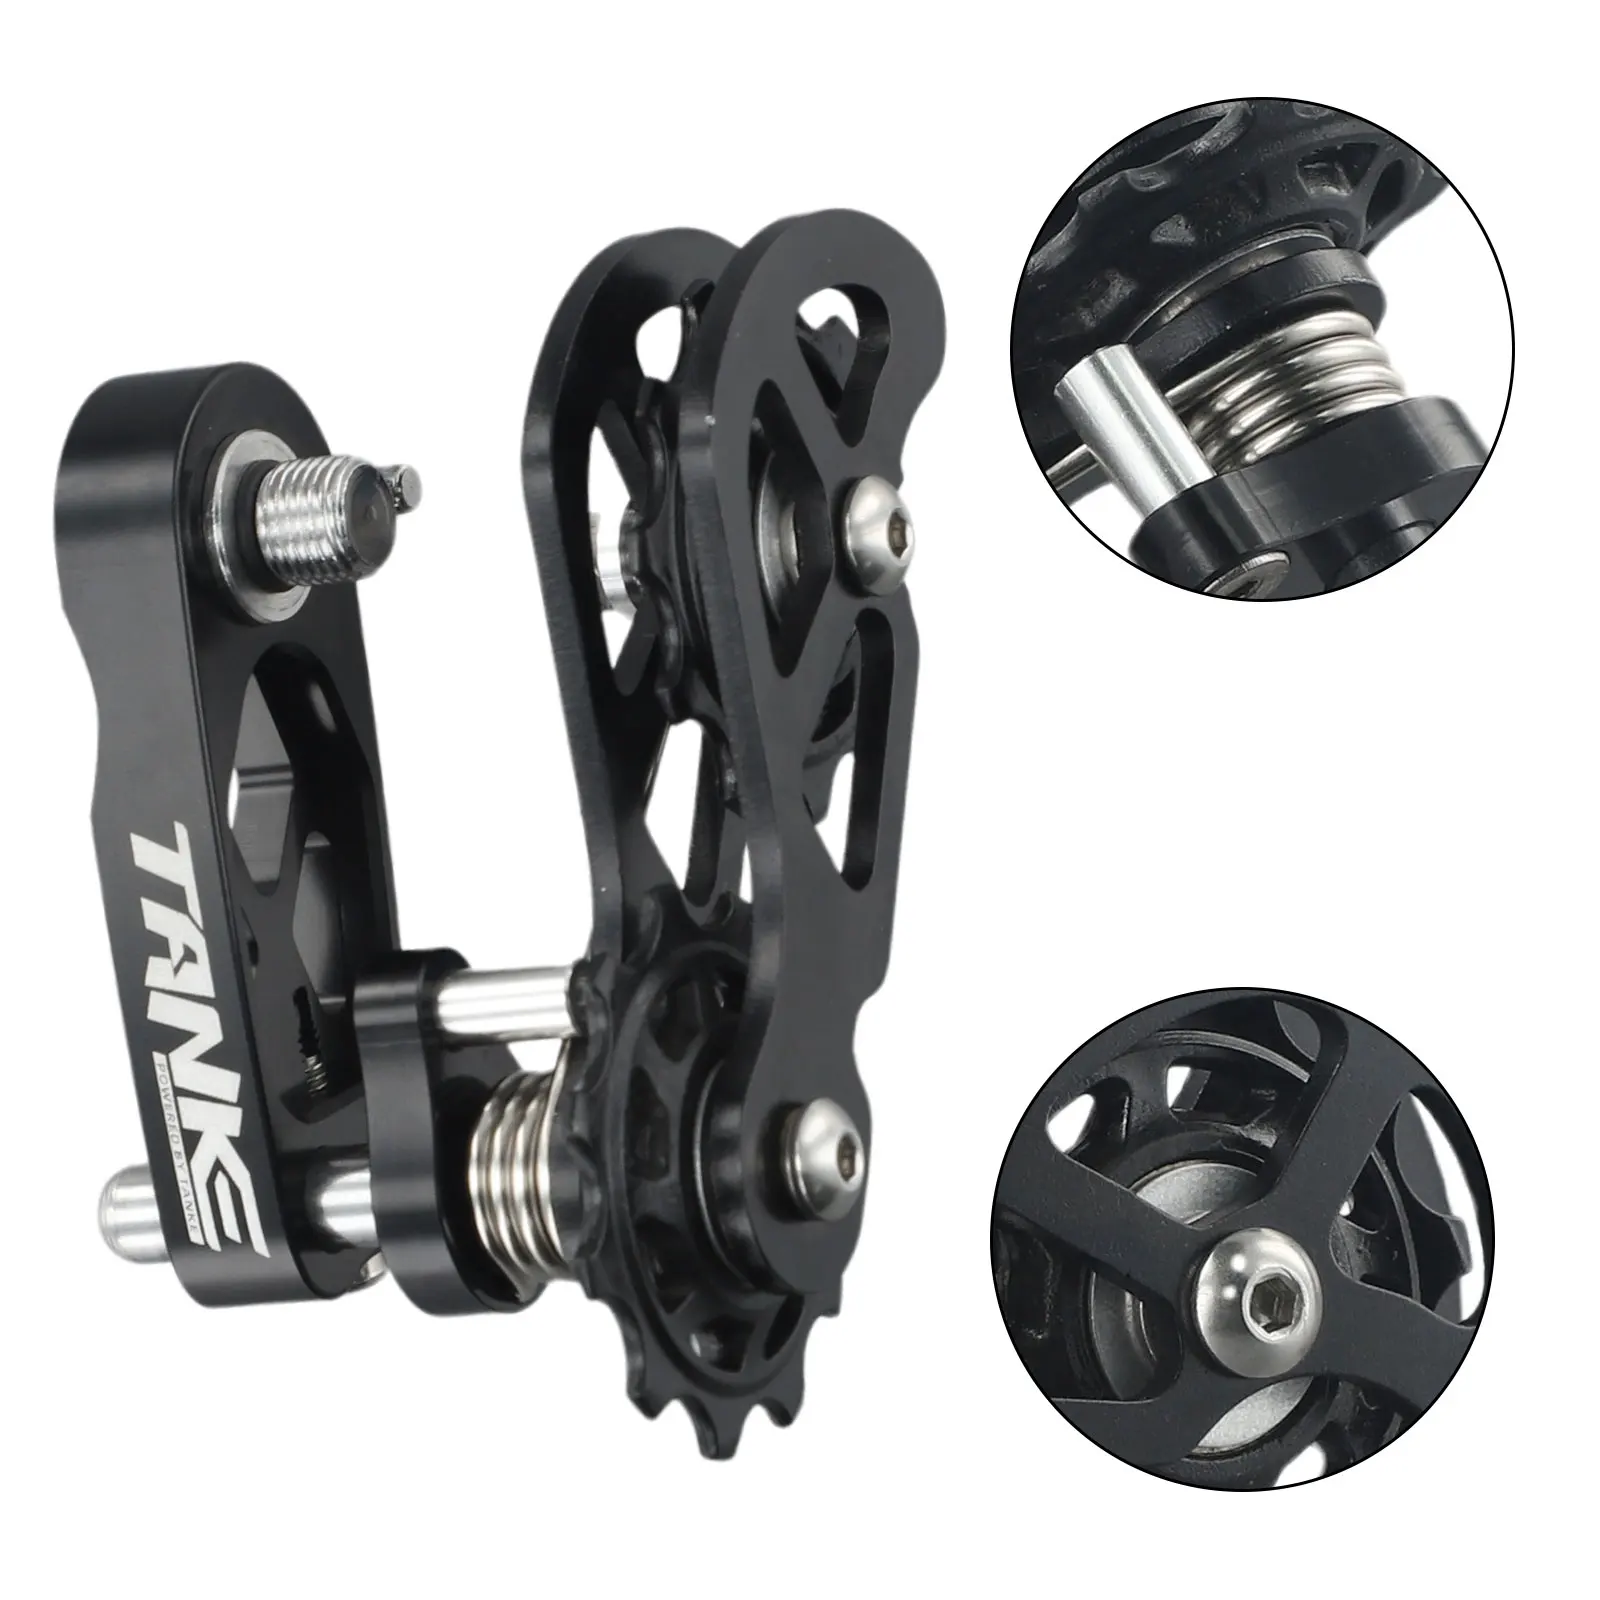 

High Quality Brand New Durable And Practical Chain Tensioner Bike Bicycle Chain Guide Converts 8-12 Speed Single Speed Converter